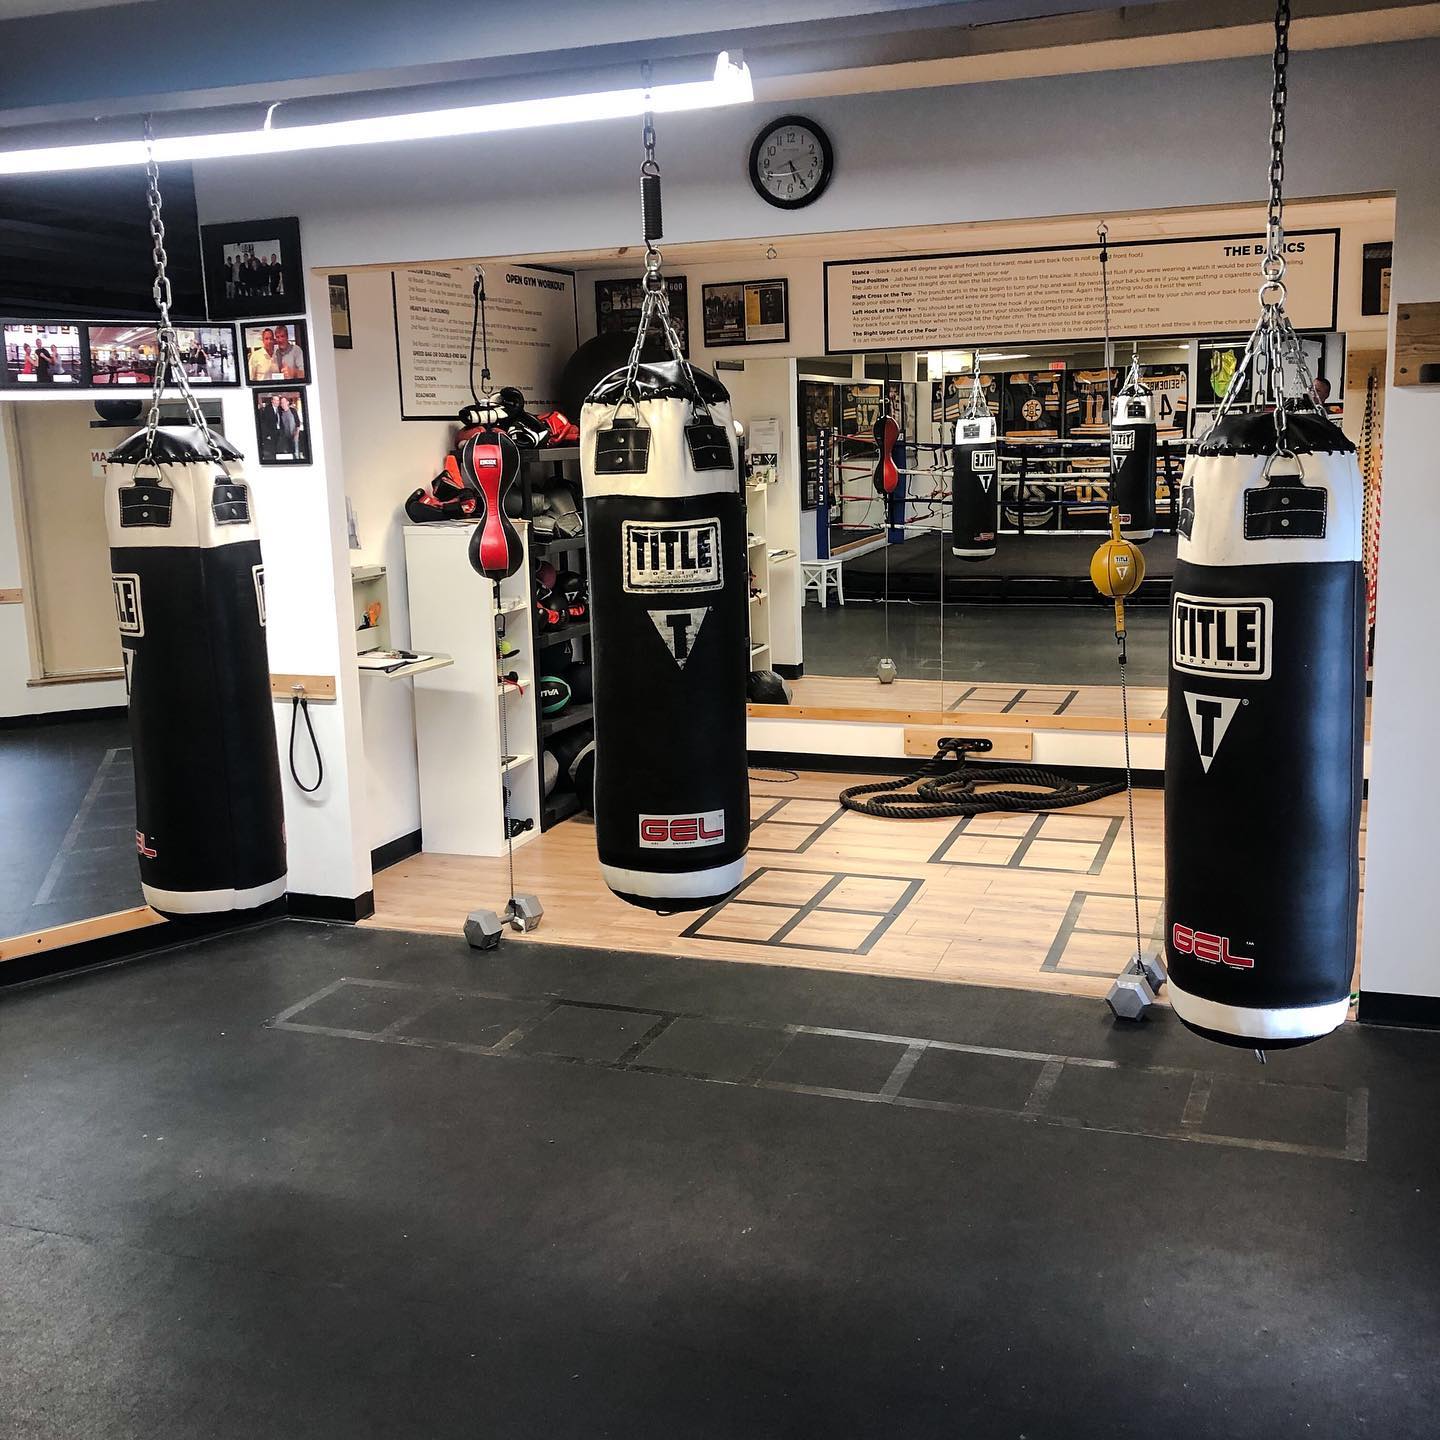 Back to School Boxing Promo, Contact us Today to sign-up for a Free Boxing Workout and find out more on how you can Save 5% on boxing packages. (781)727-9503
.
.
@instagram